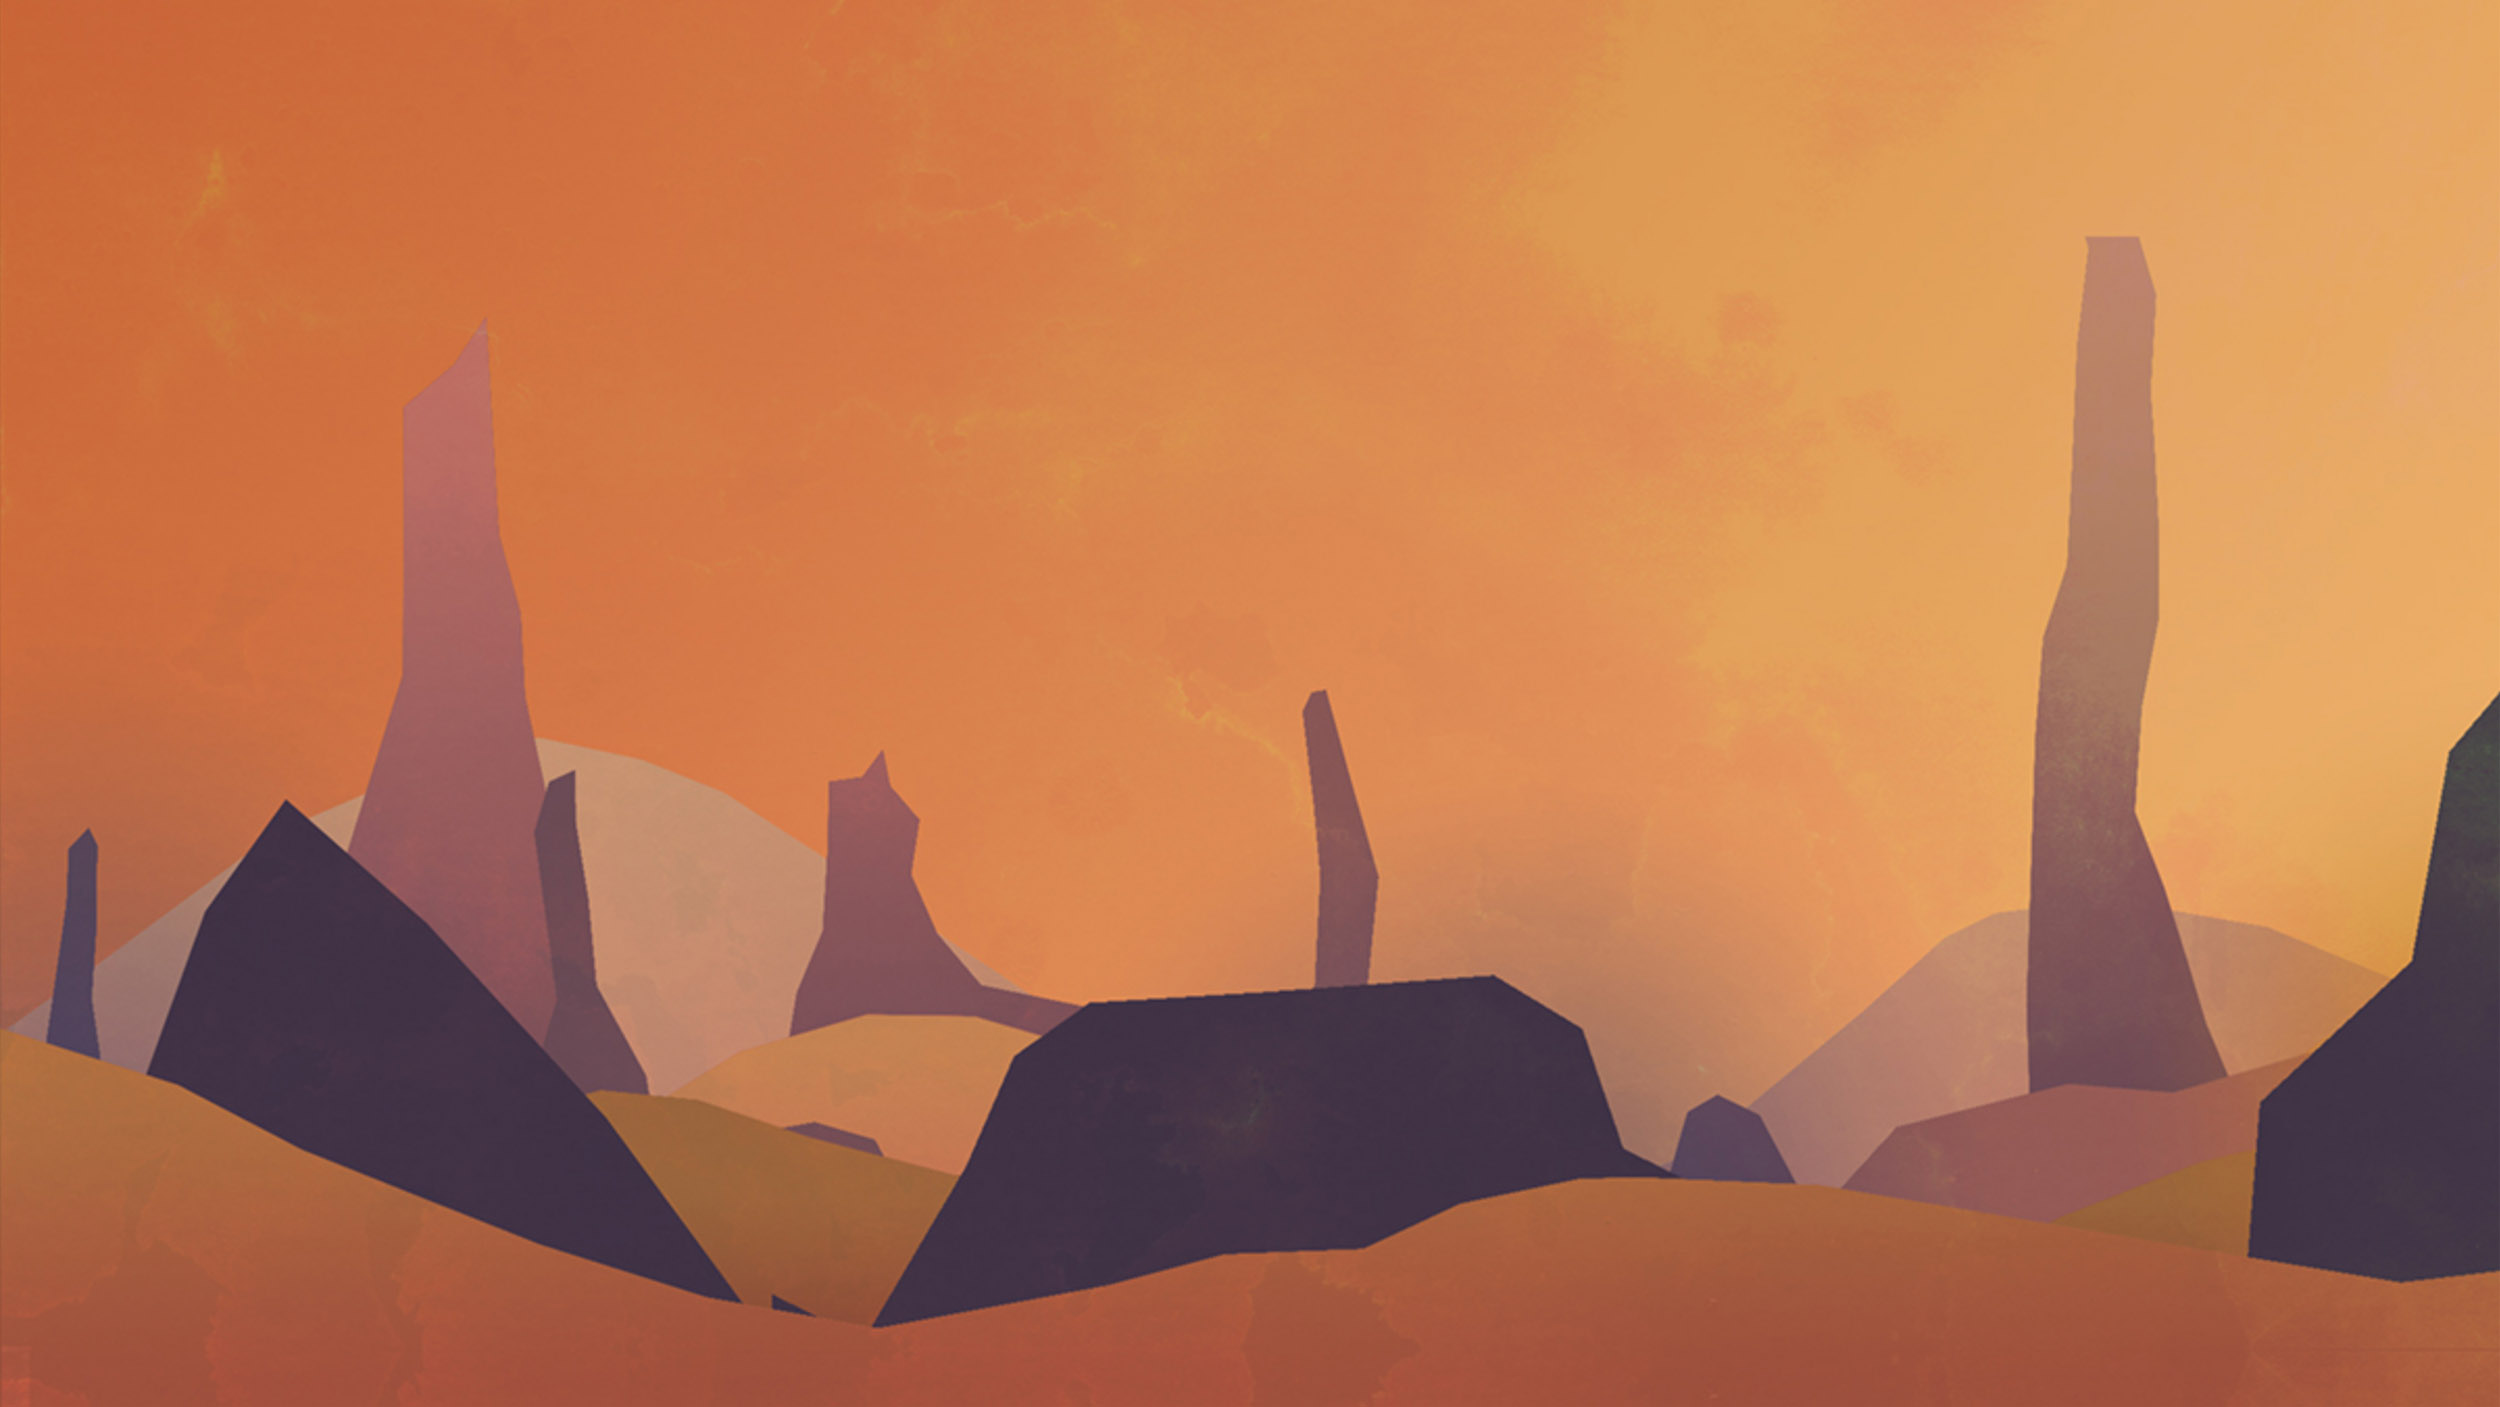 View full size version of a digital illustration of desert mountains